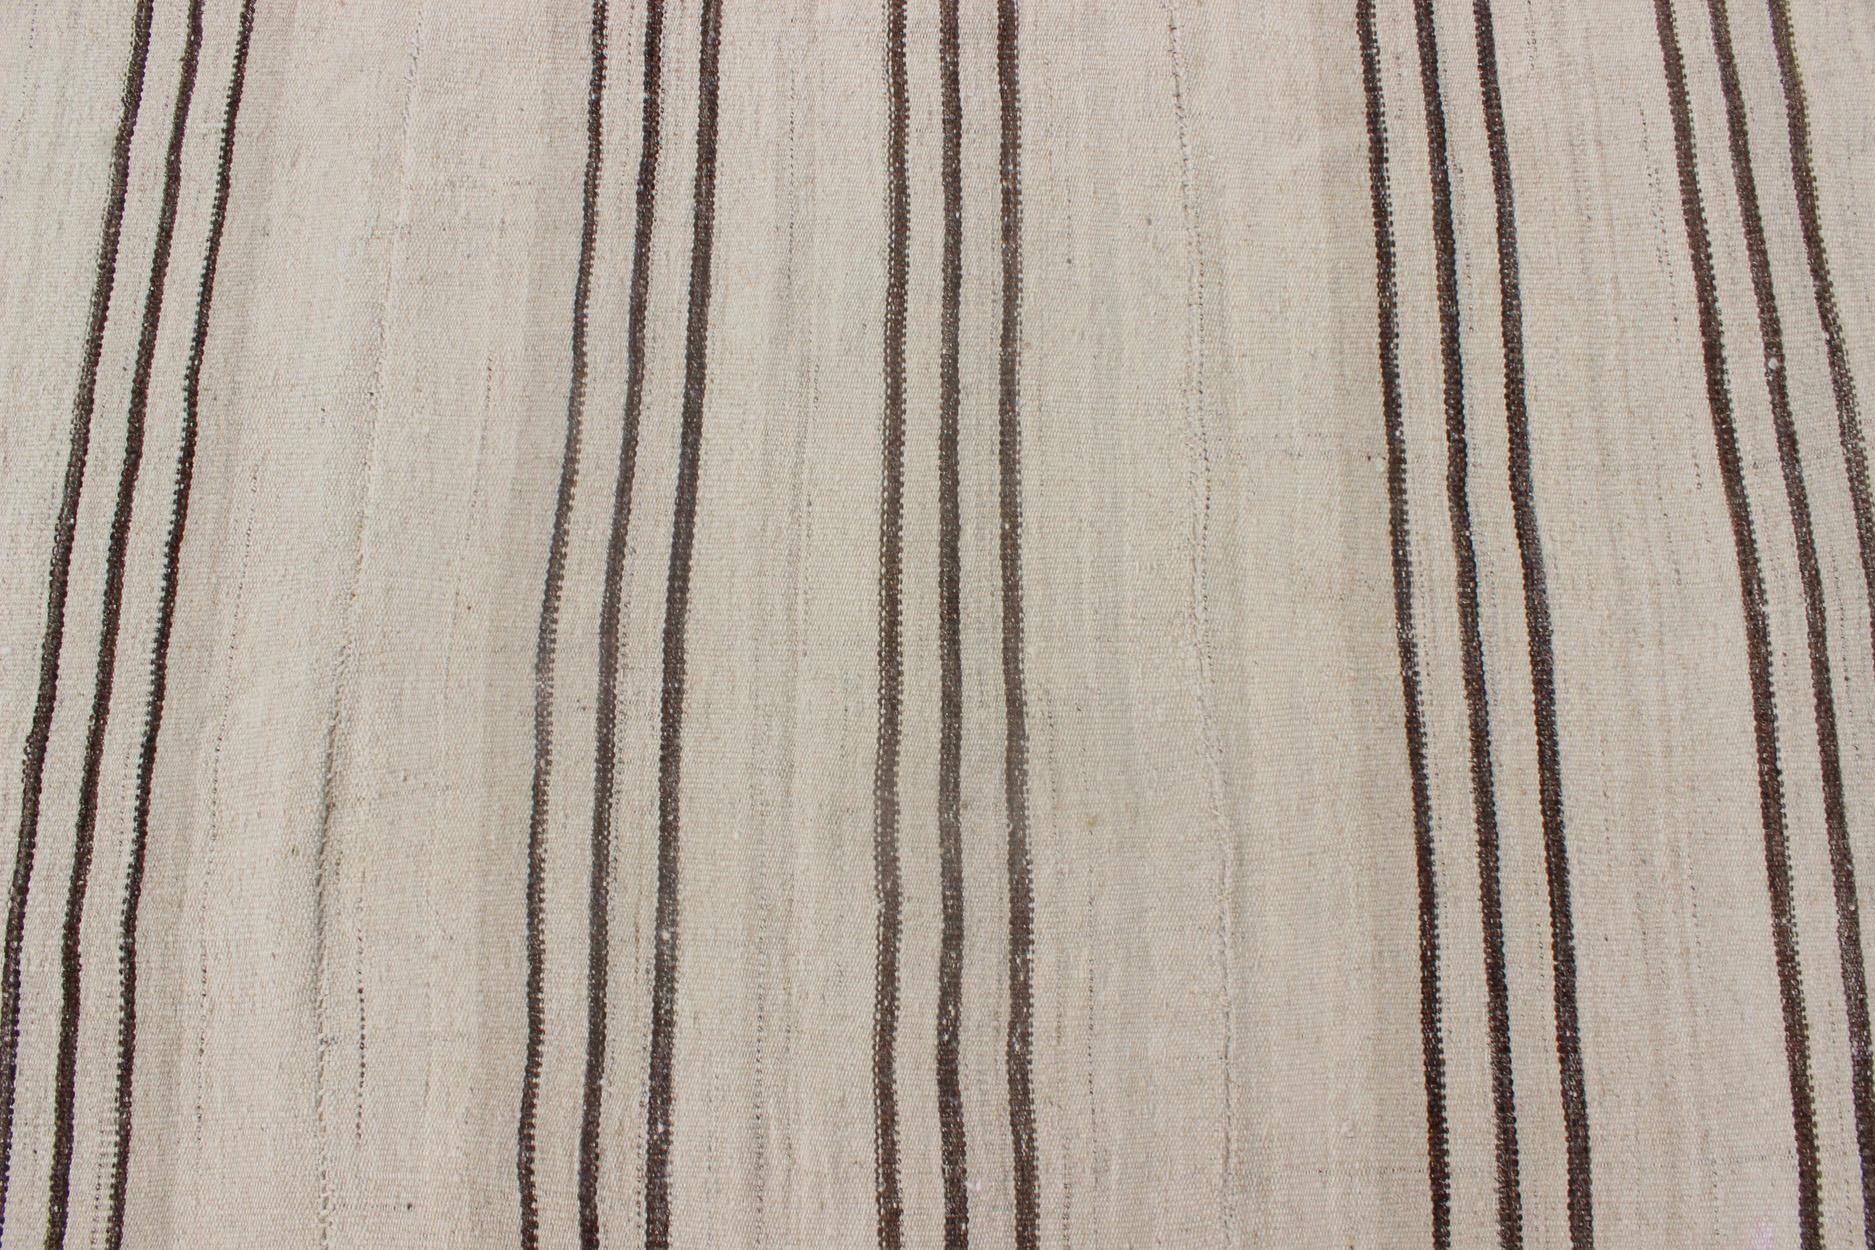 20th Century Striped Turkish Vintage Kilim Flat-Weave Rug in Shades of Browns and Ivory For Sale